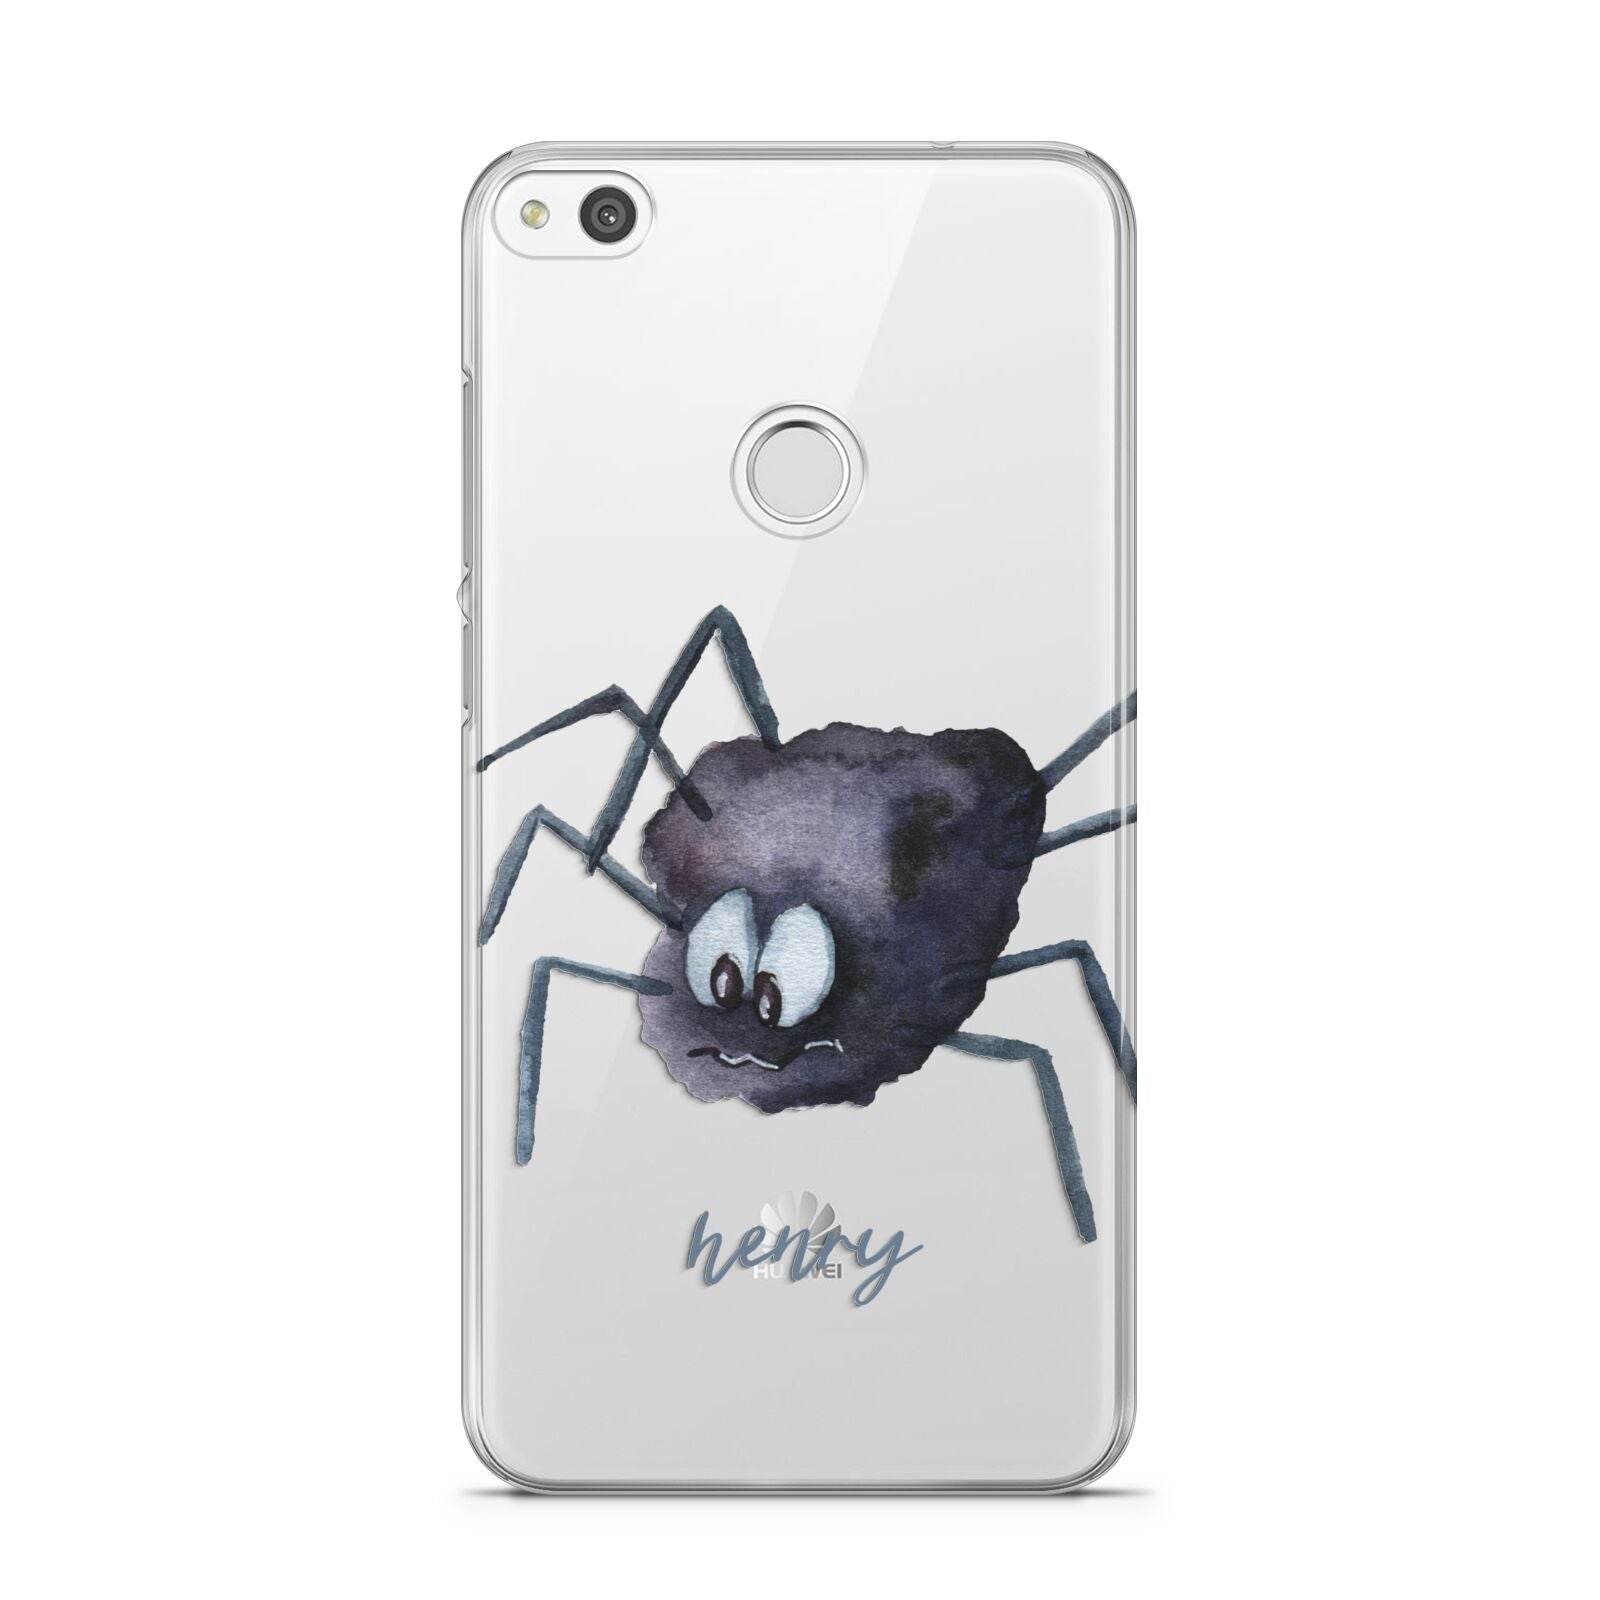 Scared Spider Personalised Huawei P8 Lite Case